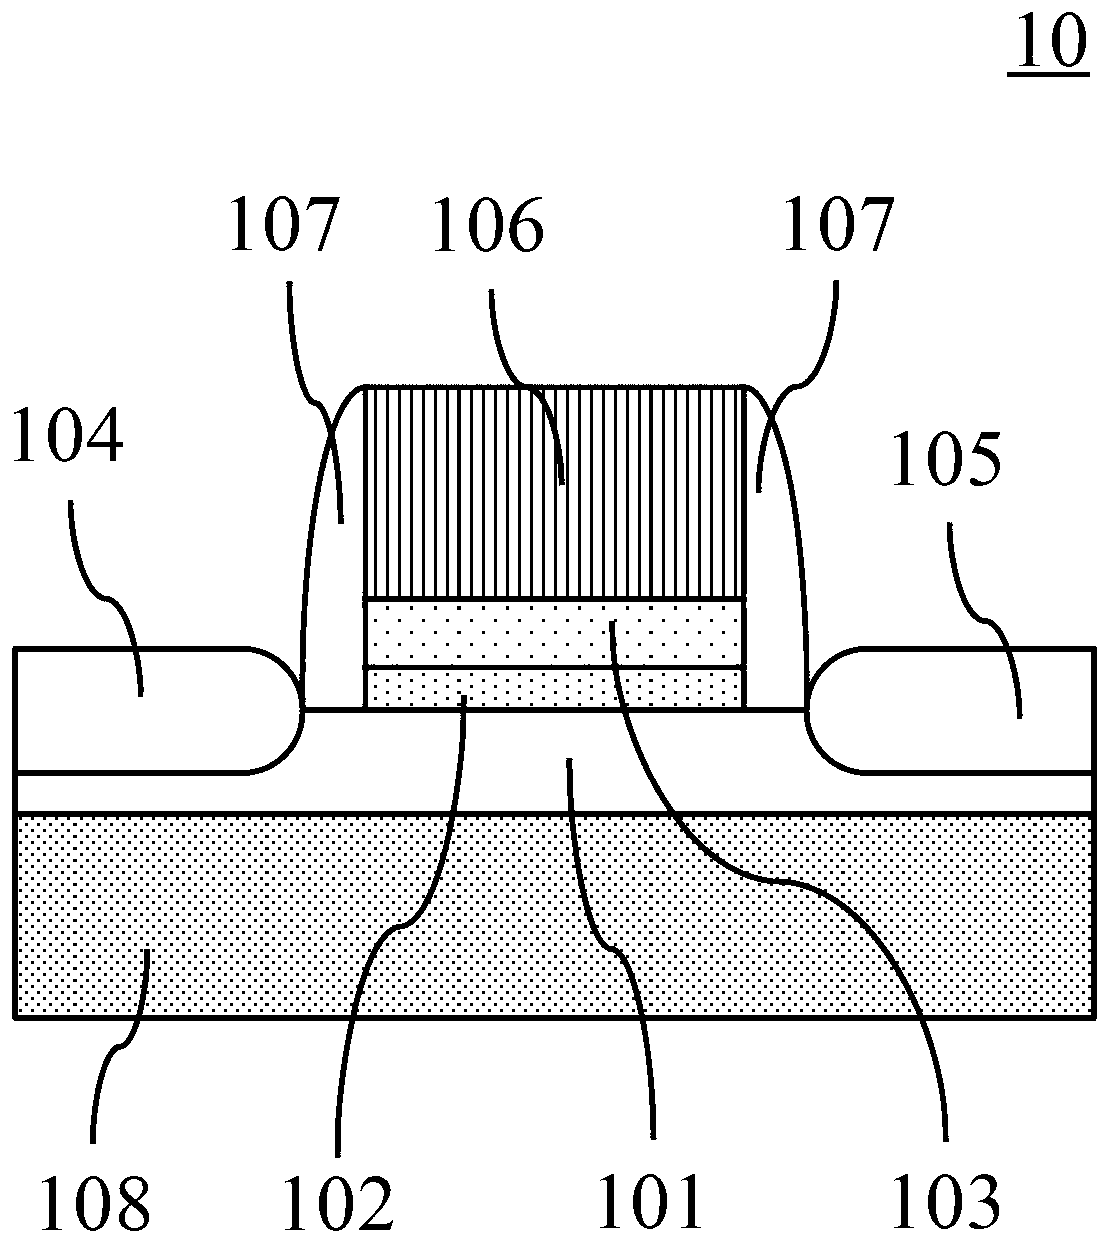 Ge channel metal-oxide-semiconductor field-effect transistor with InAlP cover layer